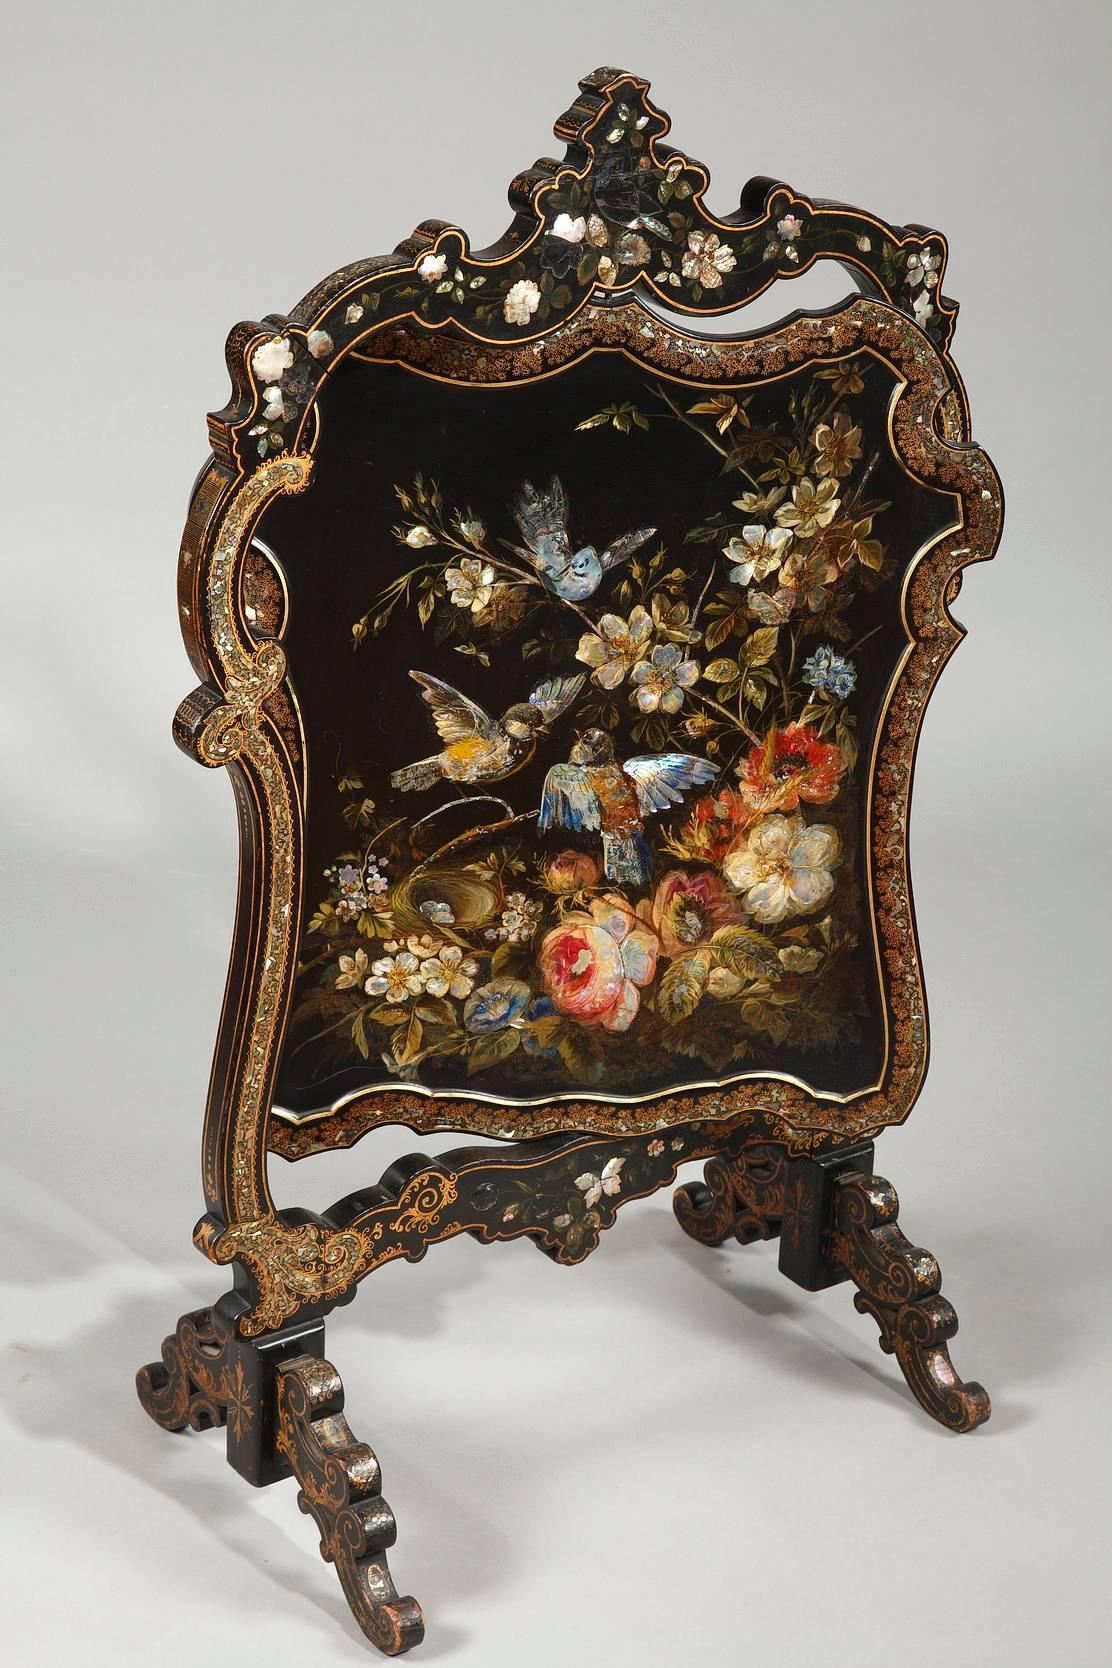 Black lacquer fire screen with a swiveling central panel and four small, curved legs. The screen is inlaid with mother-of-pearl, and the central panel is decorated on both sides with multicolored bouquets of flowers and birds, Napoleon III period,
